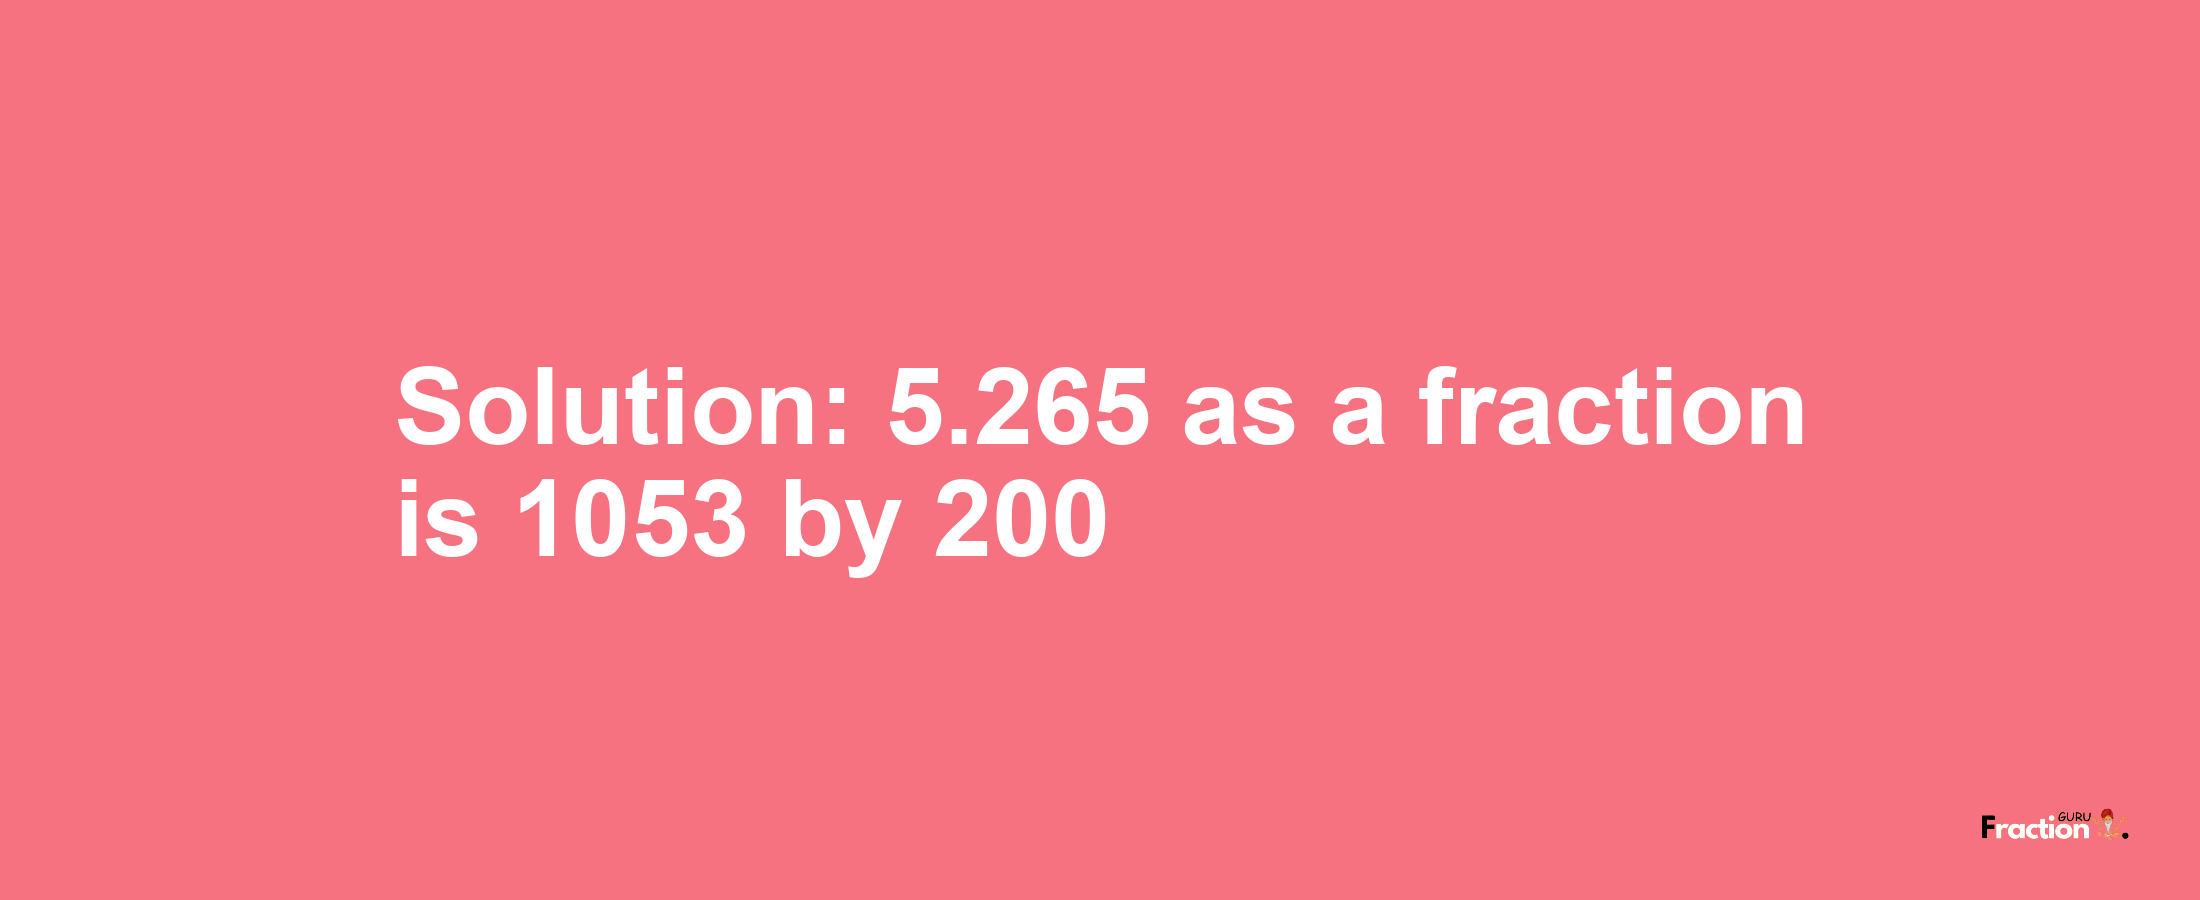 Solution:5.265 as a fraction is 1053/200